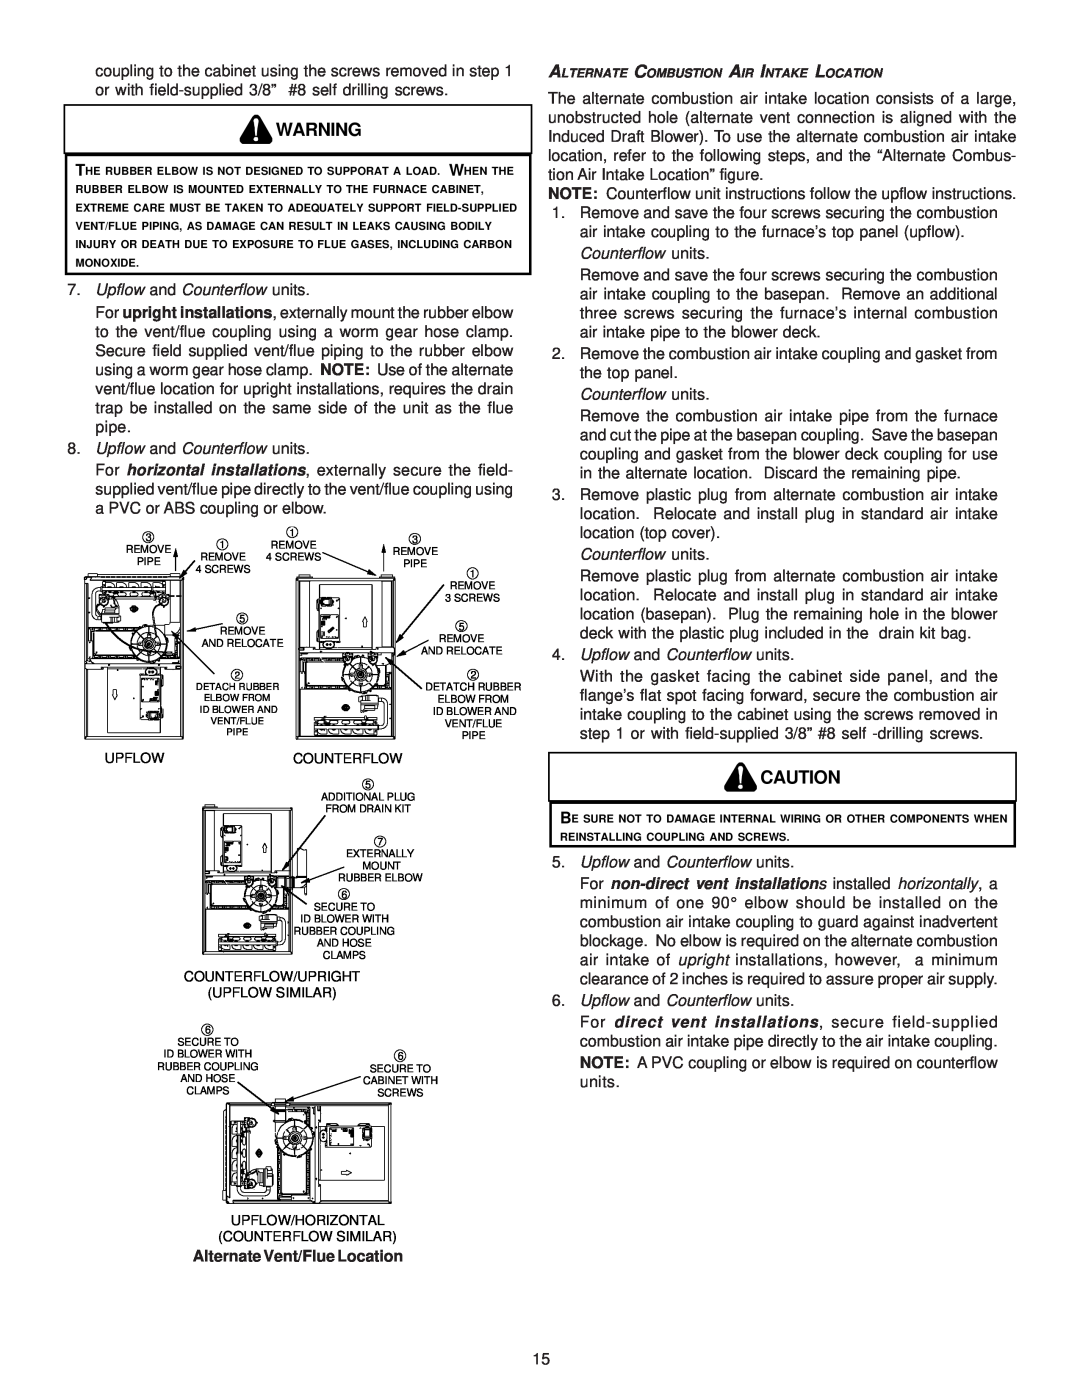 Amana ACV9, AMV9 installation instructions Upflow and Counterflow units, Alternate Vent/Flue Location 